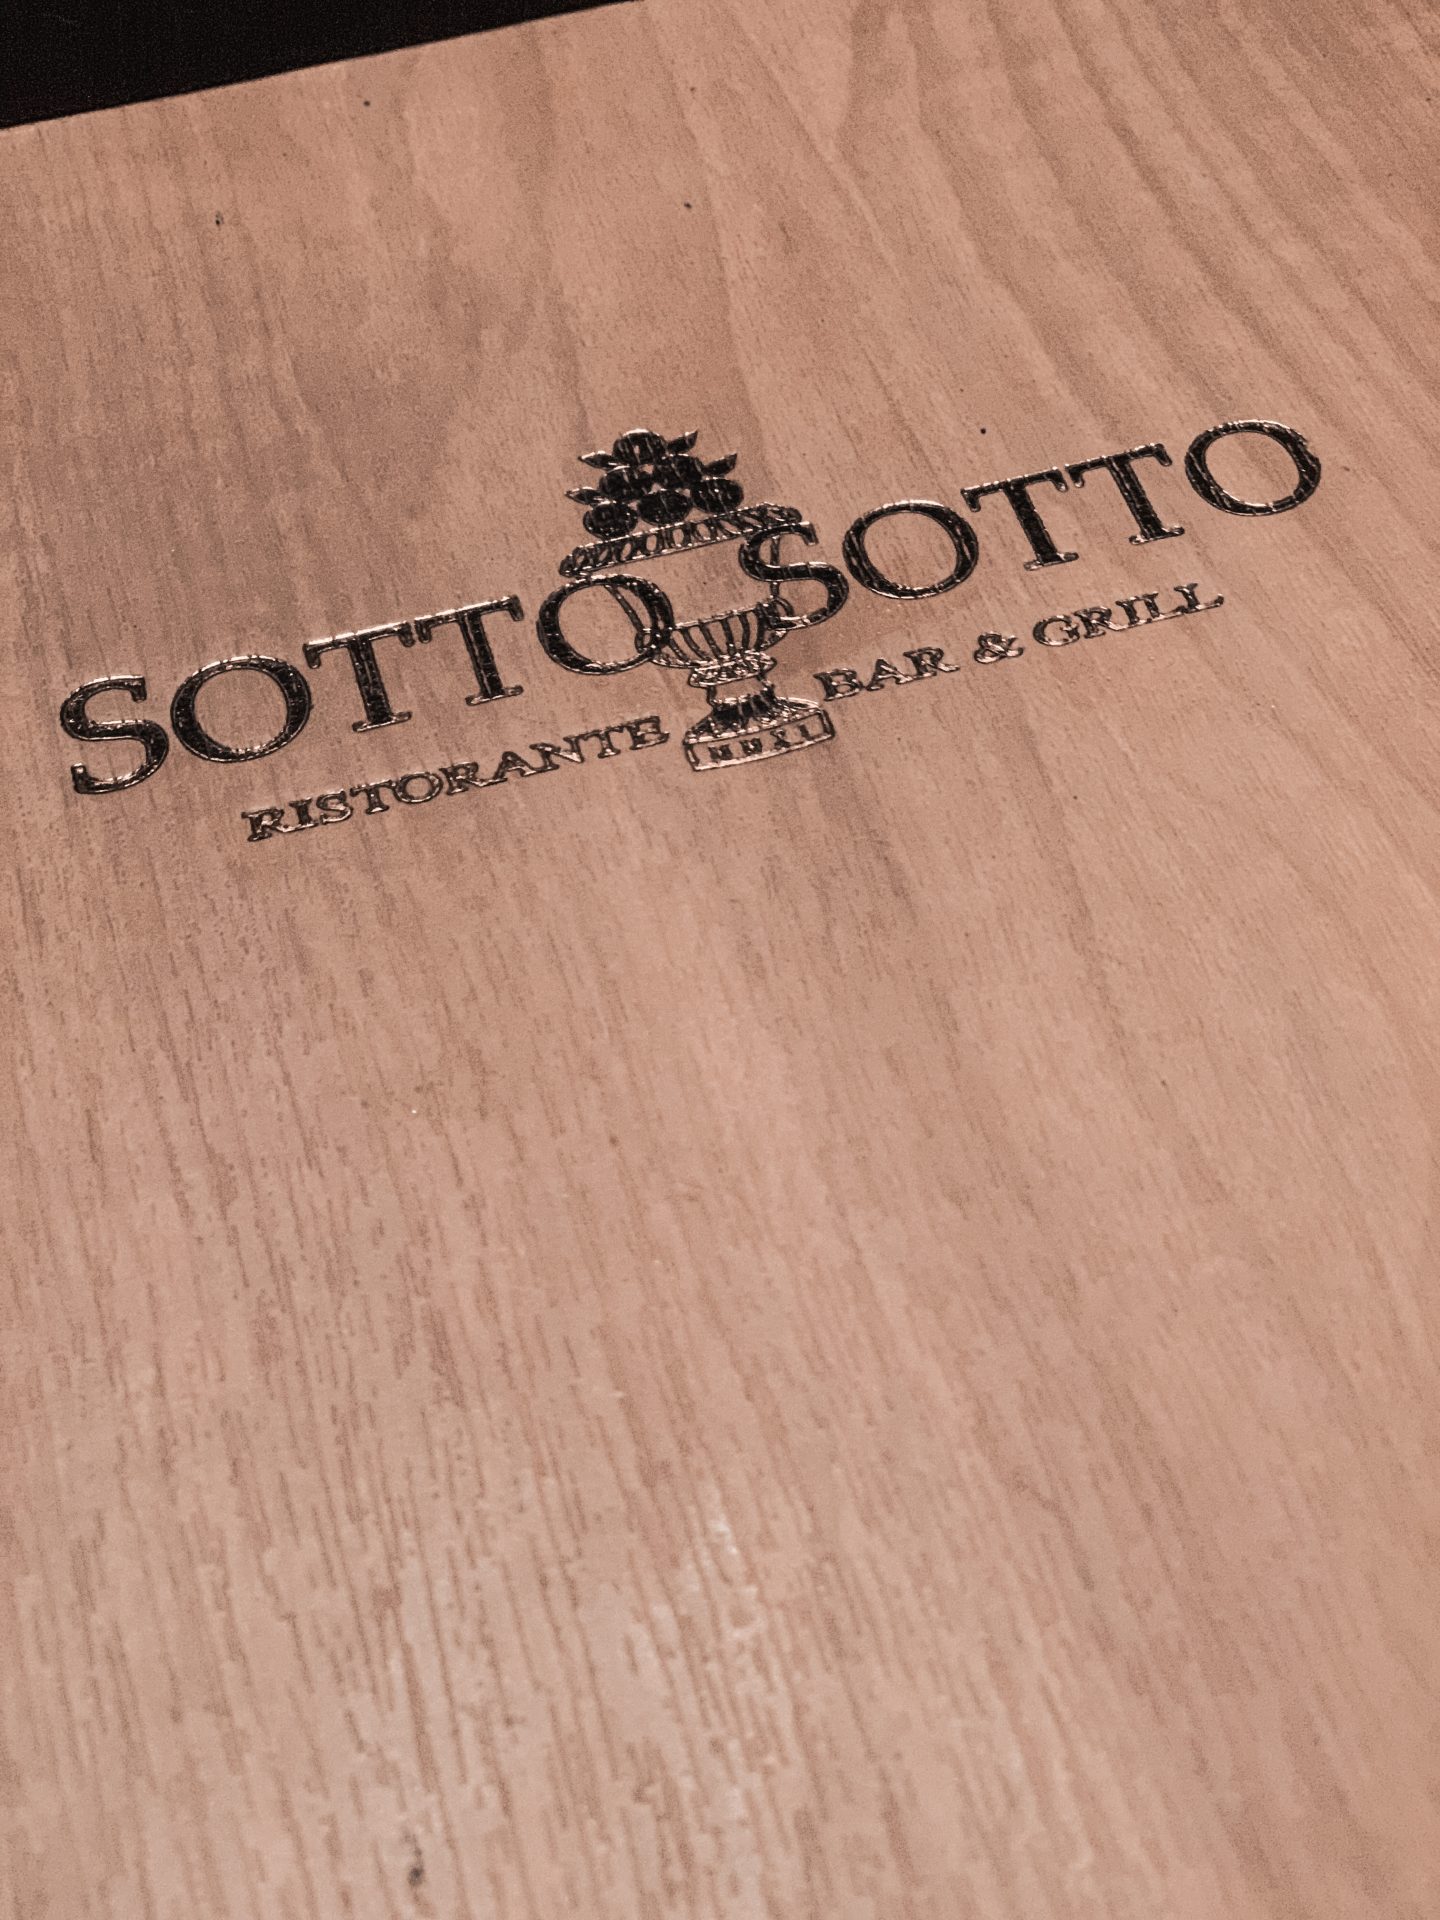 Sotto Sotto, Awarded Best Italian Restaurant in Bath at the Bath Good Food Awards.